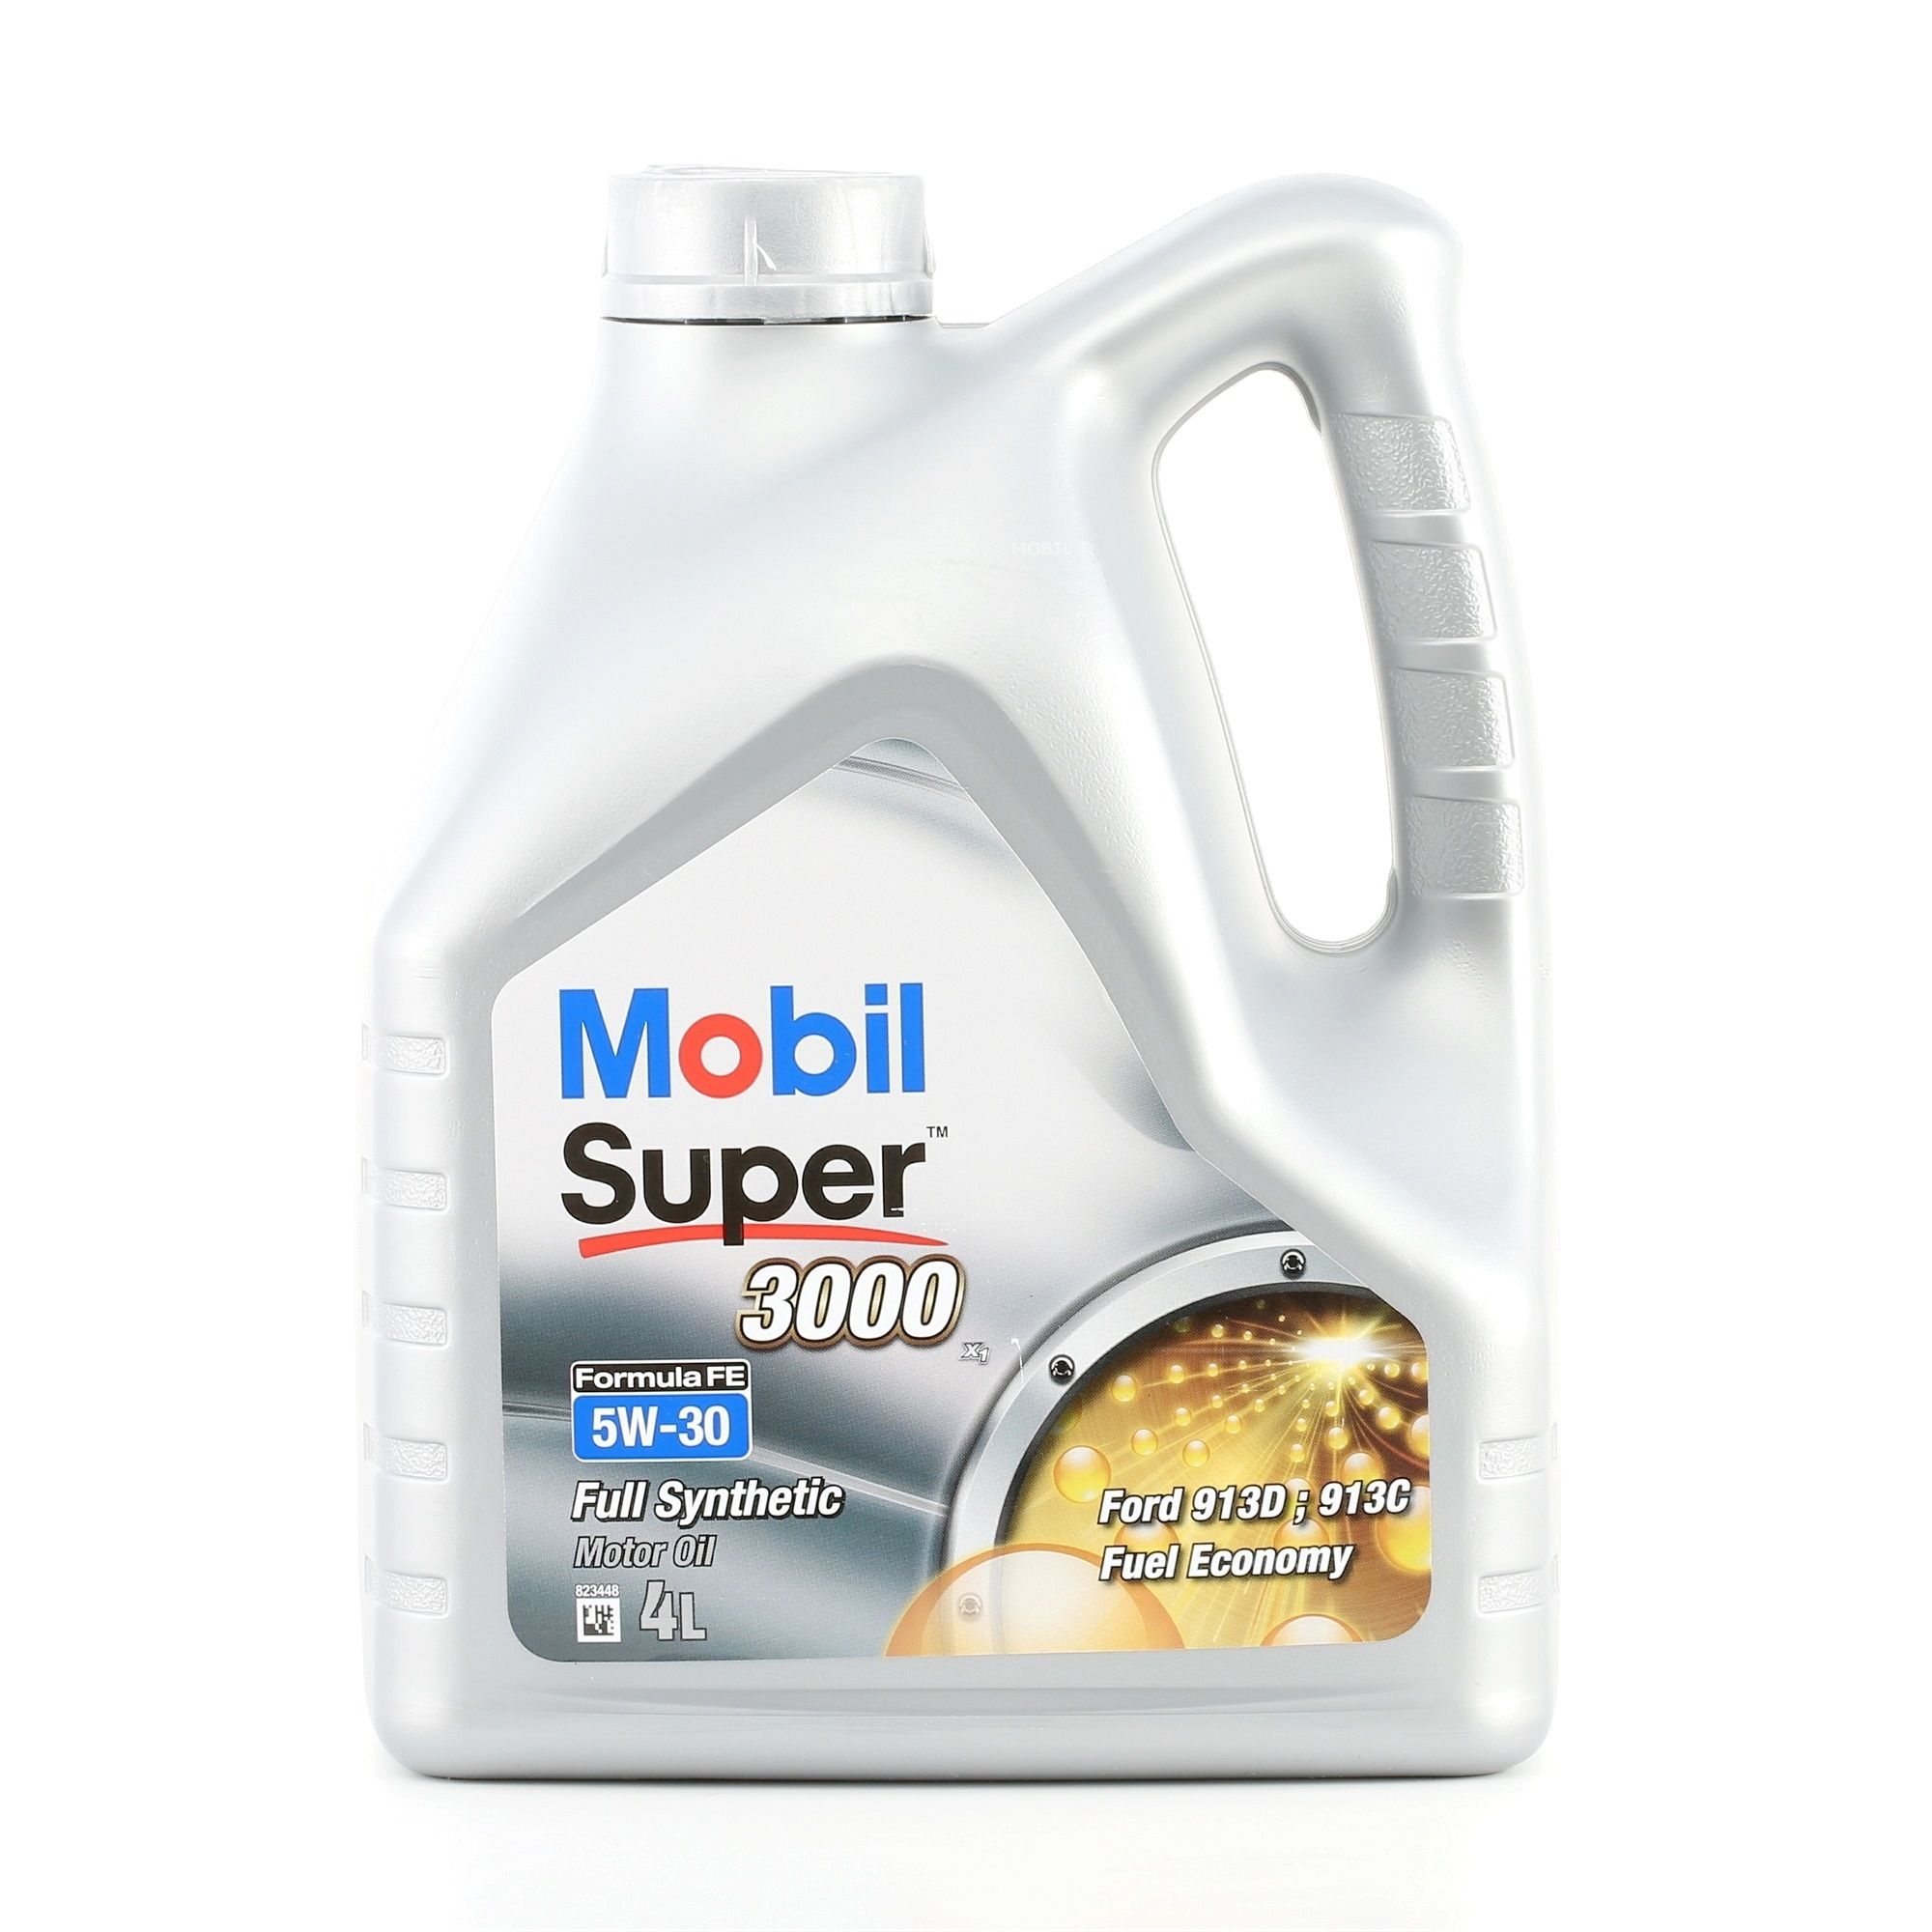 Image of MOBIL Olio motore OPEL,FORD,RENAULT 151528 Olio per motore,Olio auto,Olio per auto,Olio motore per auto